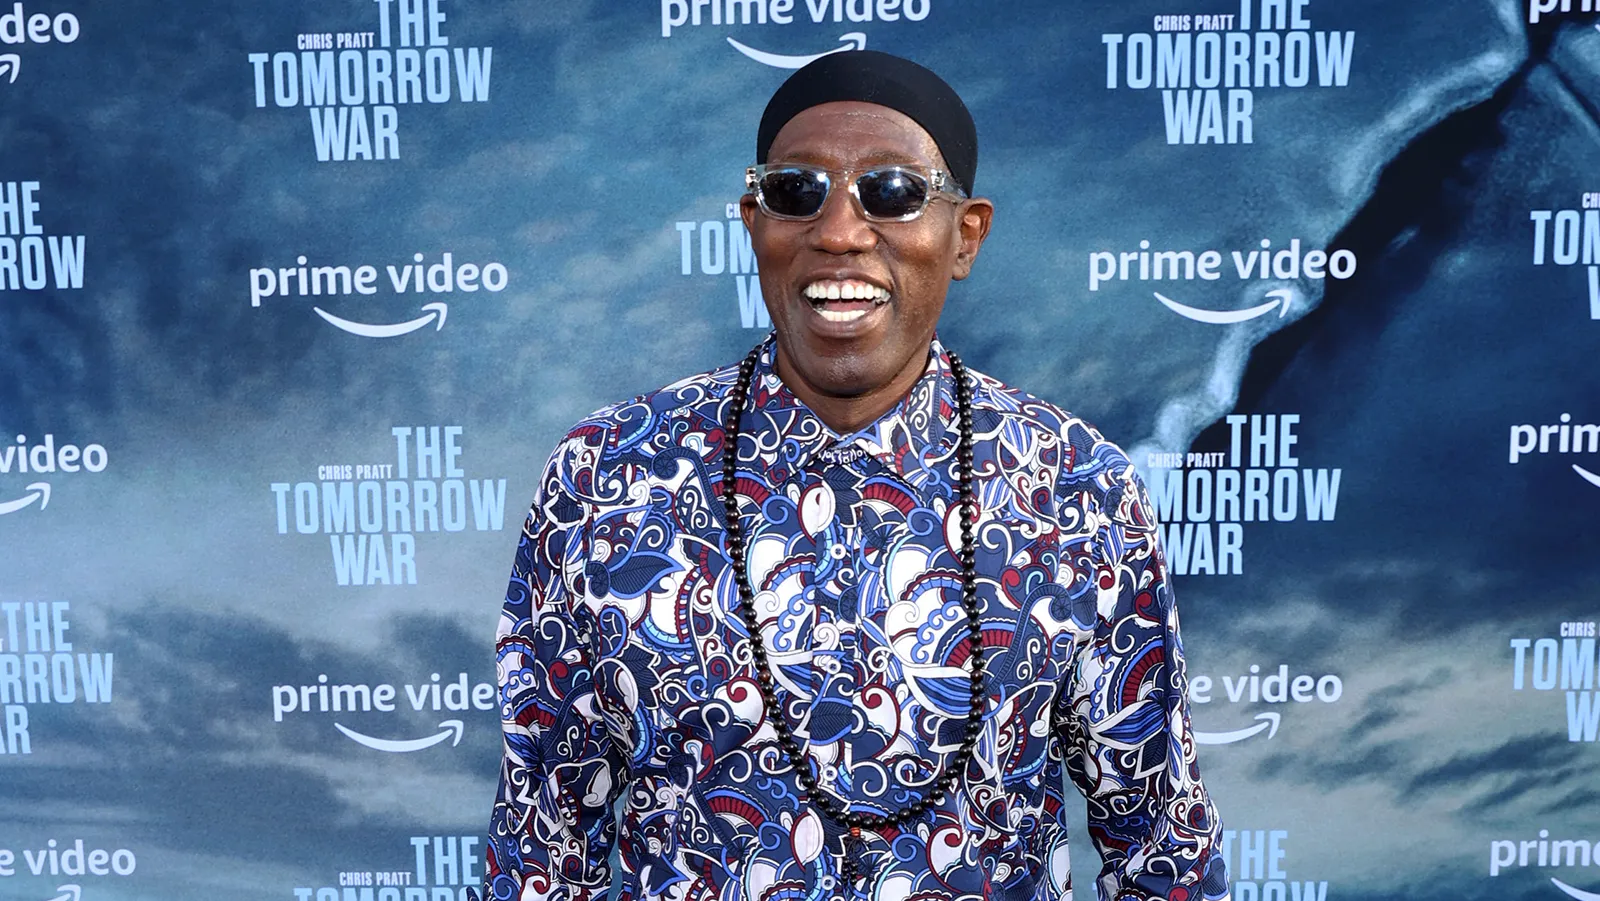 What has Wesley Snipes been up to lately?